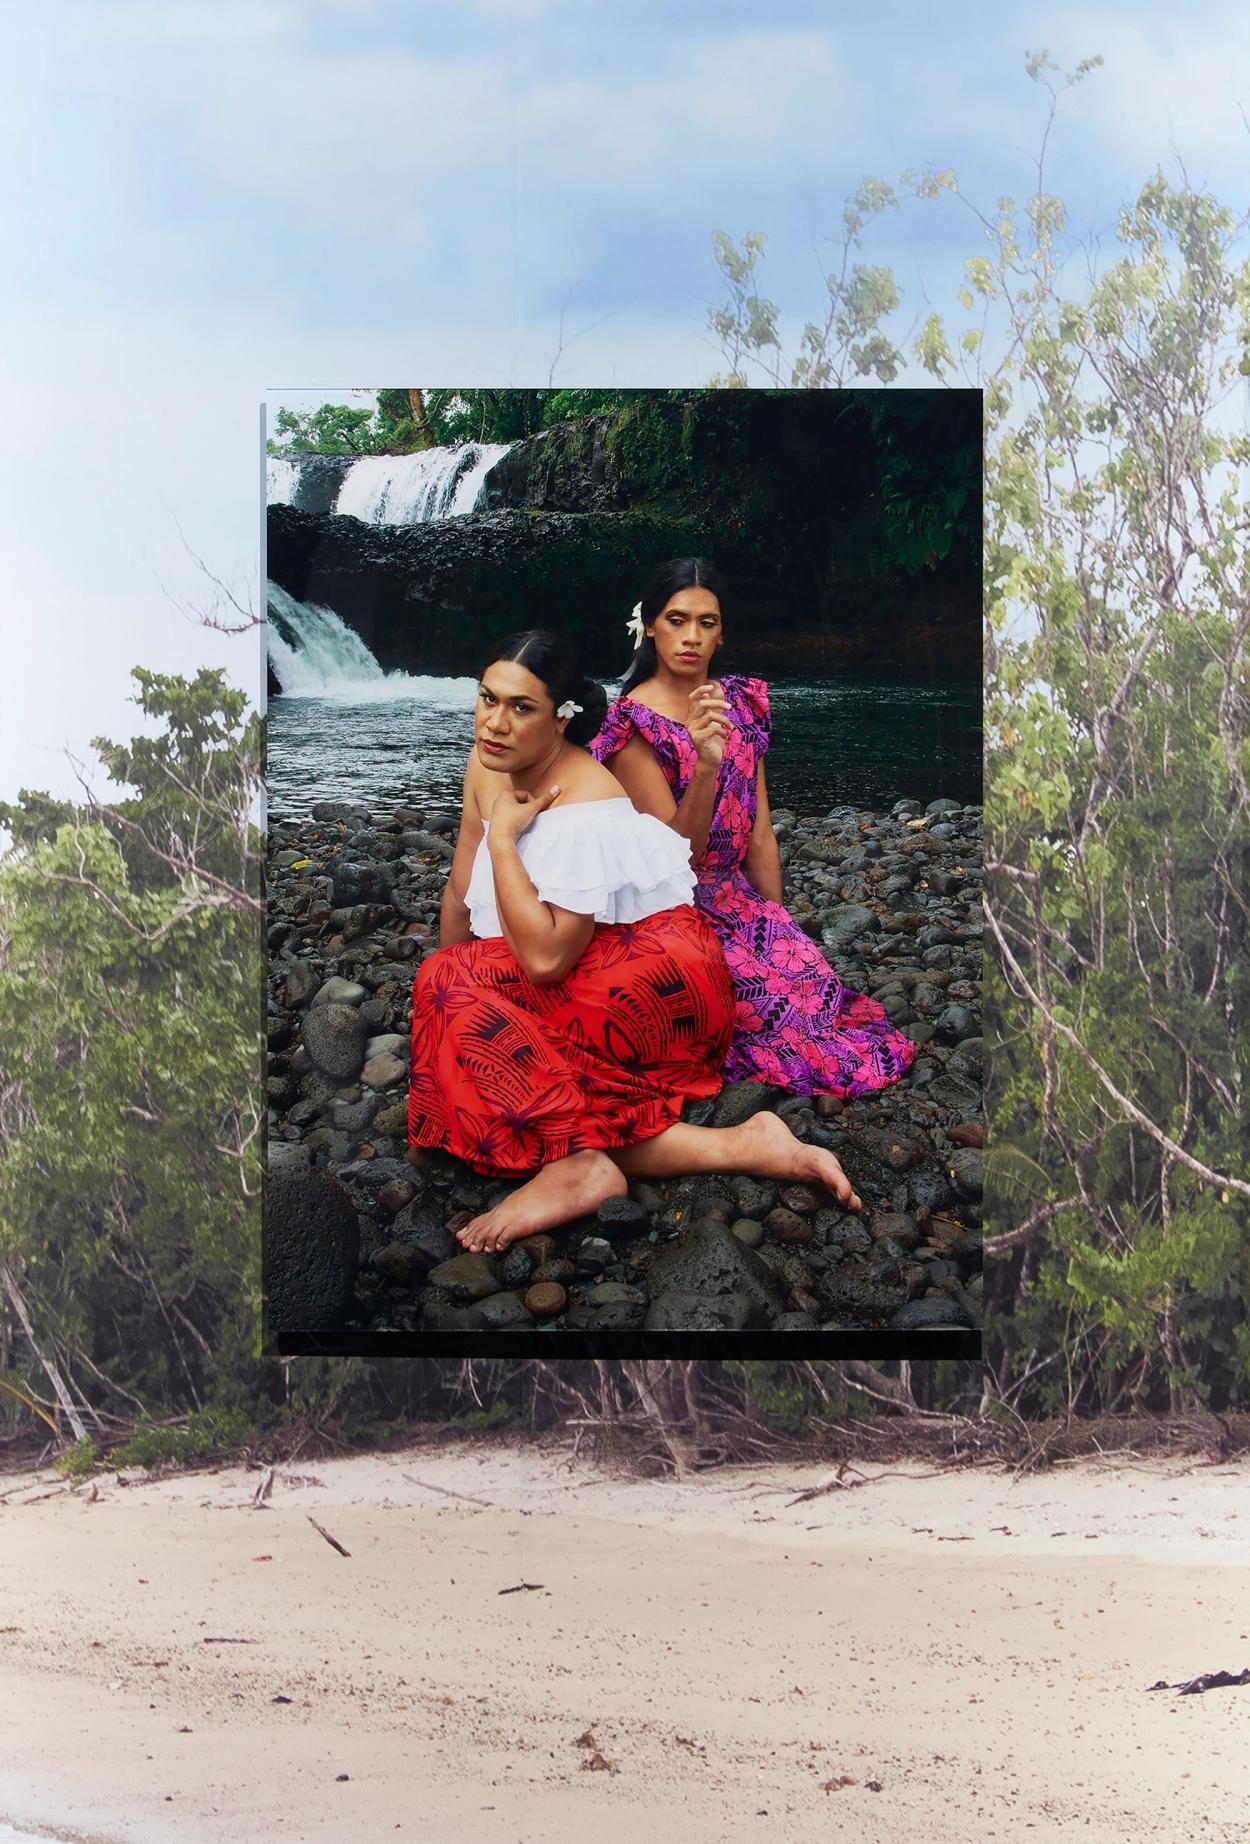 Image of two faʻafafine sitting on the rocky bank of a waterfall.